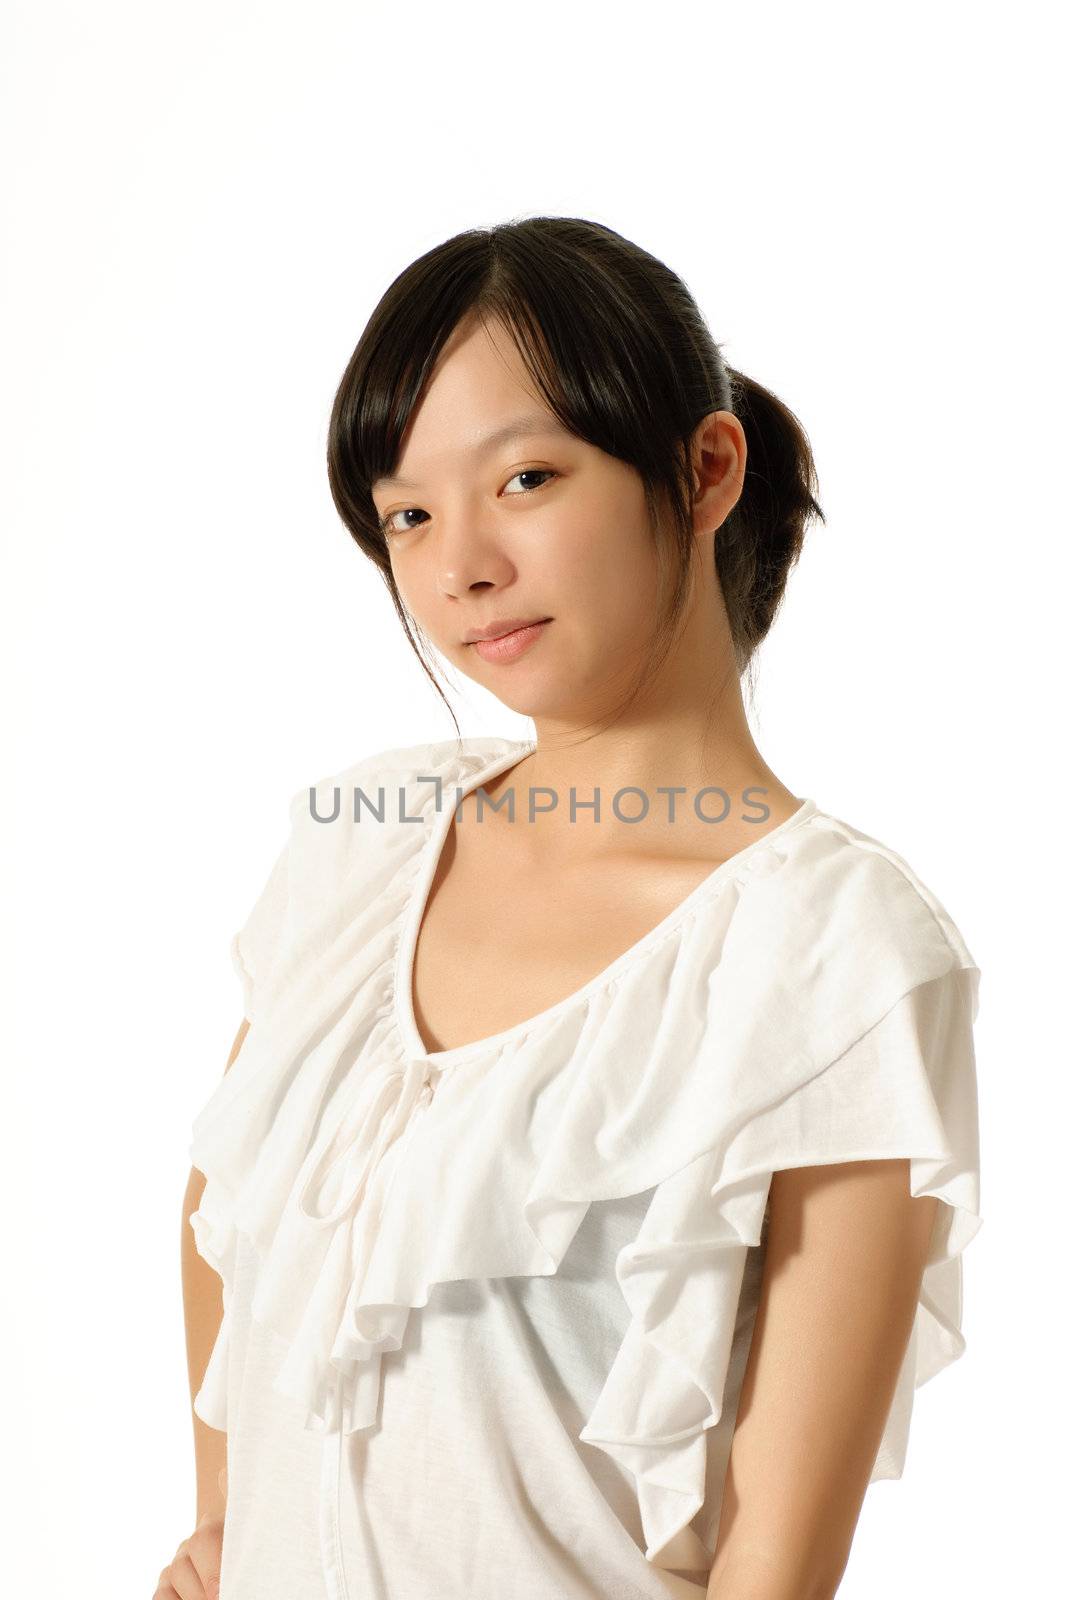 Fashion beauty of Asian, closeup portrait against on white background.